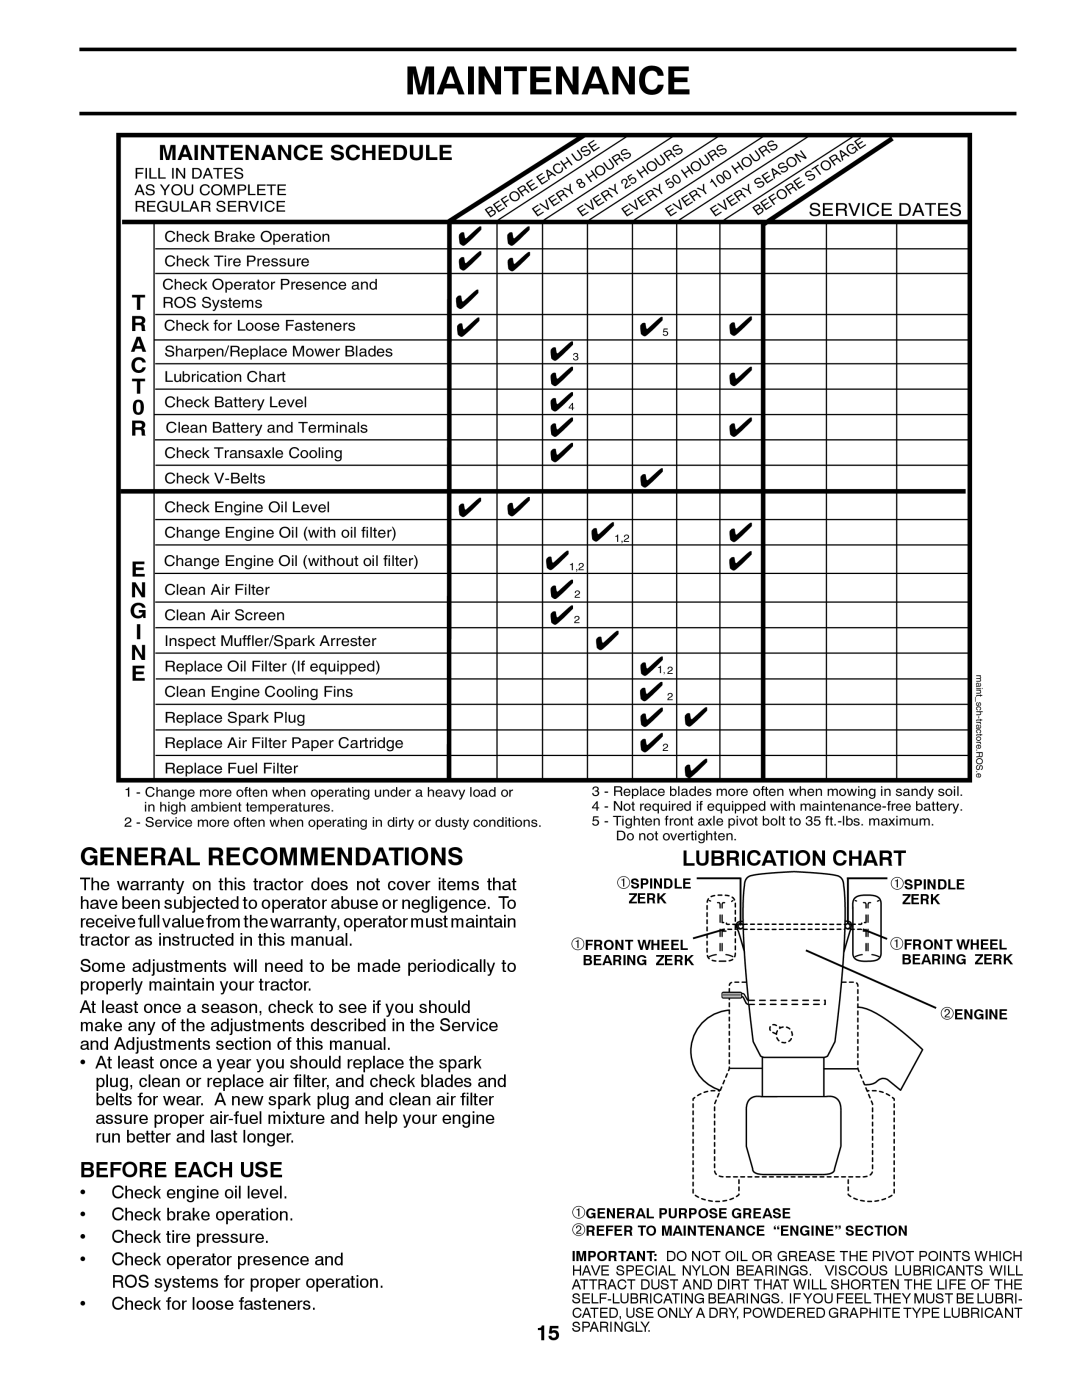 Poulan PK20H42YT manual General Recommendations, Maintenance Schedule, Lubrication Chart, Before Each Use 